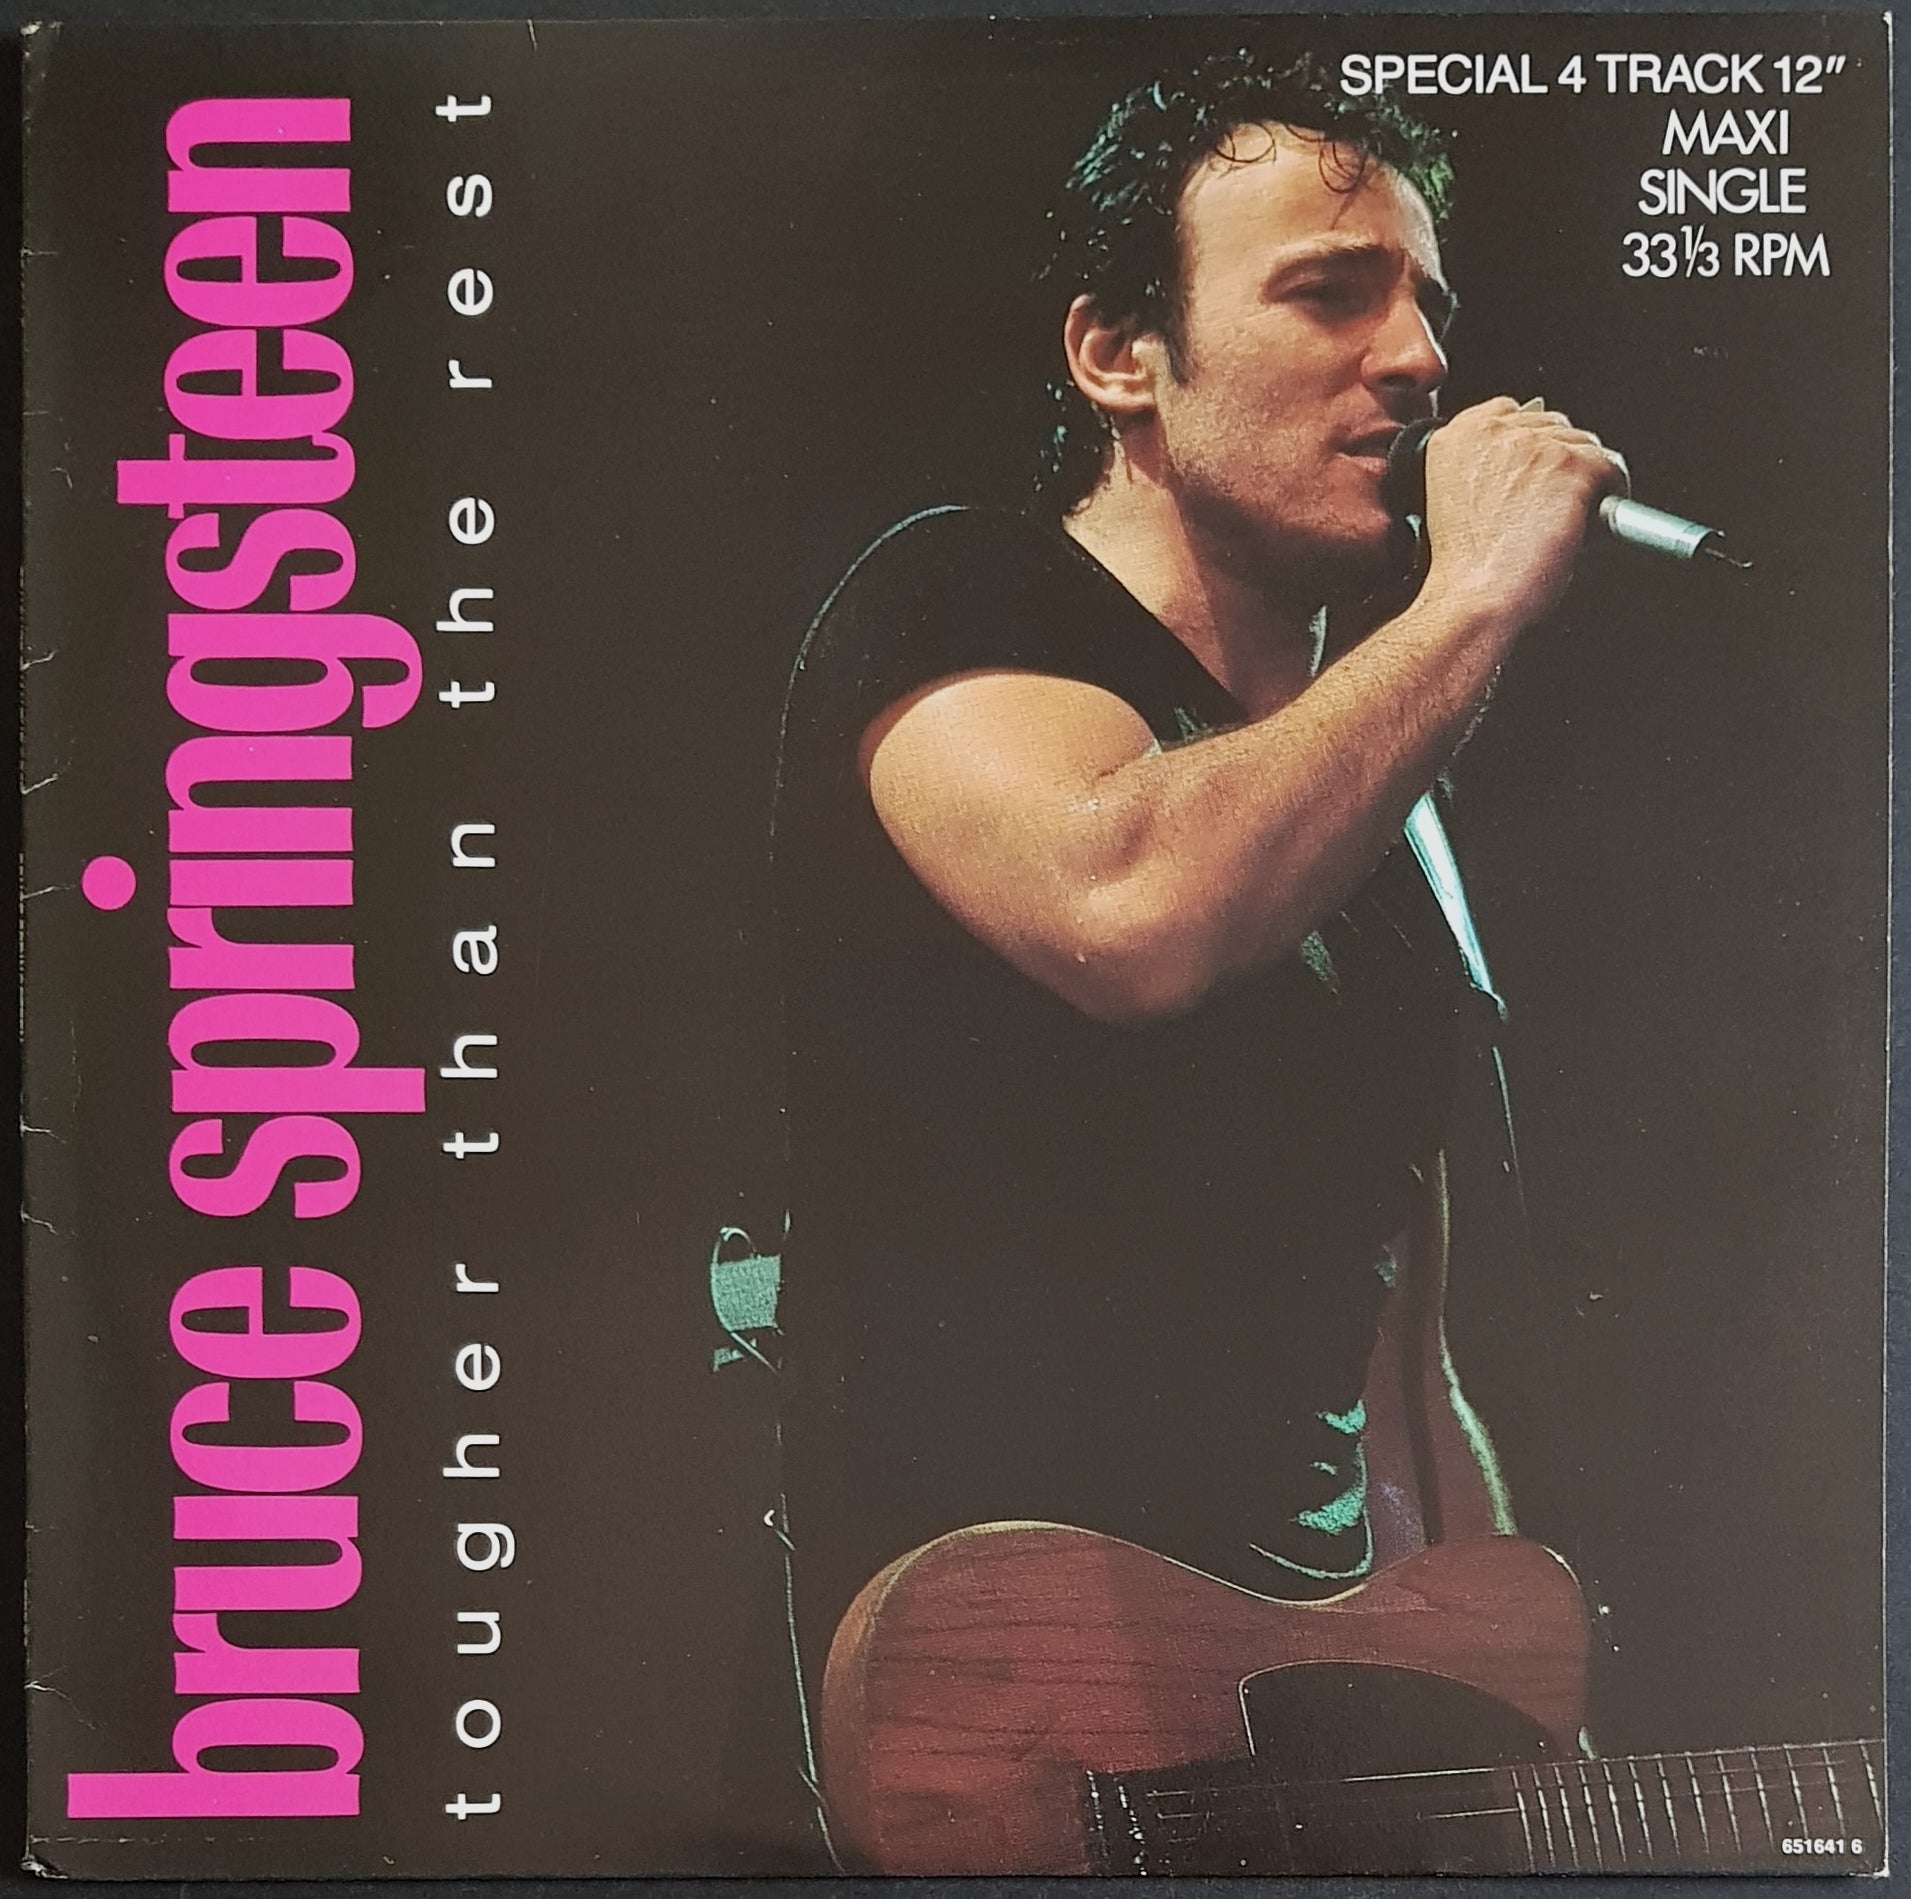 Bruce Springsteen's Tougher Than the Rest — a song about